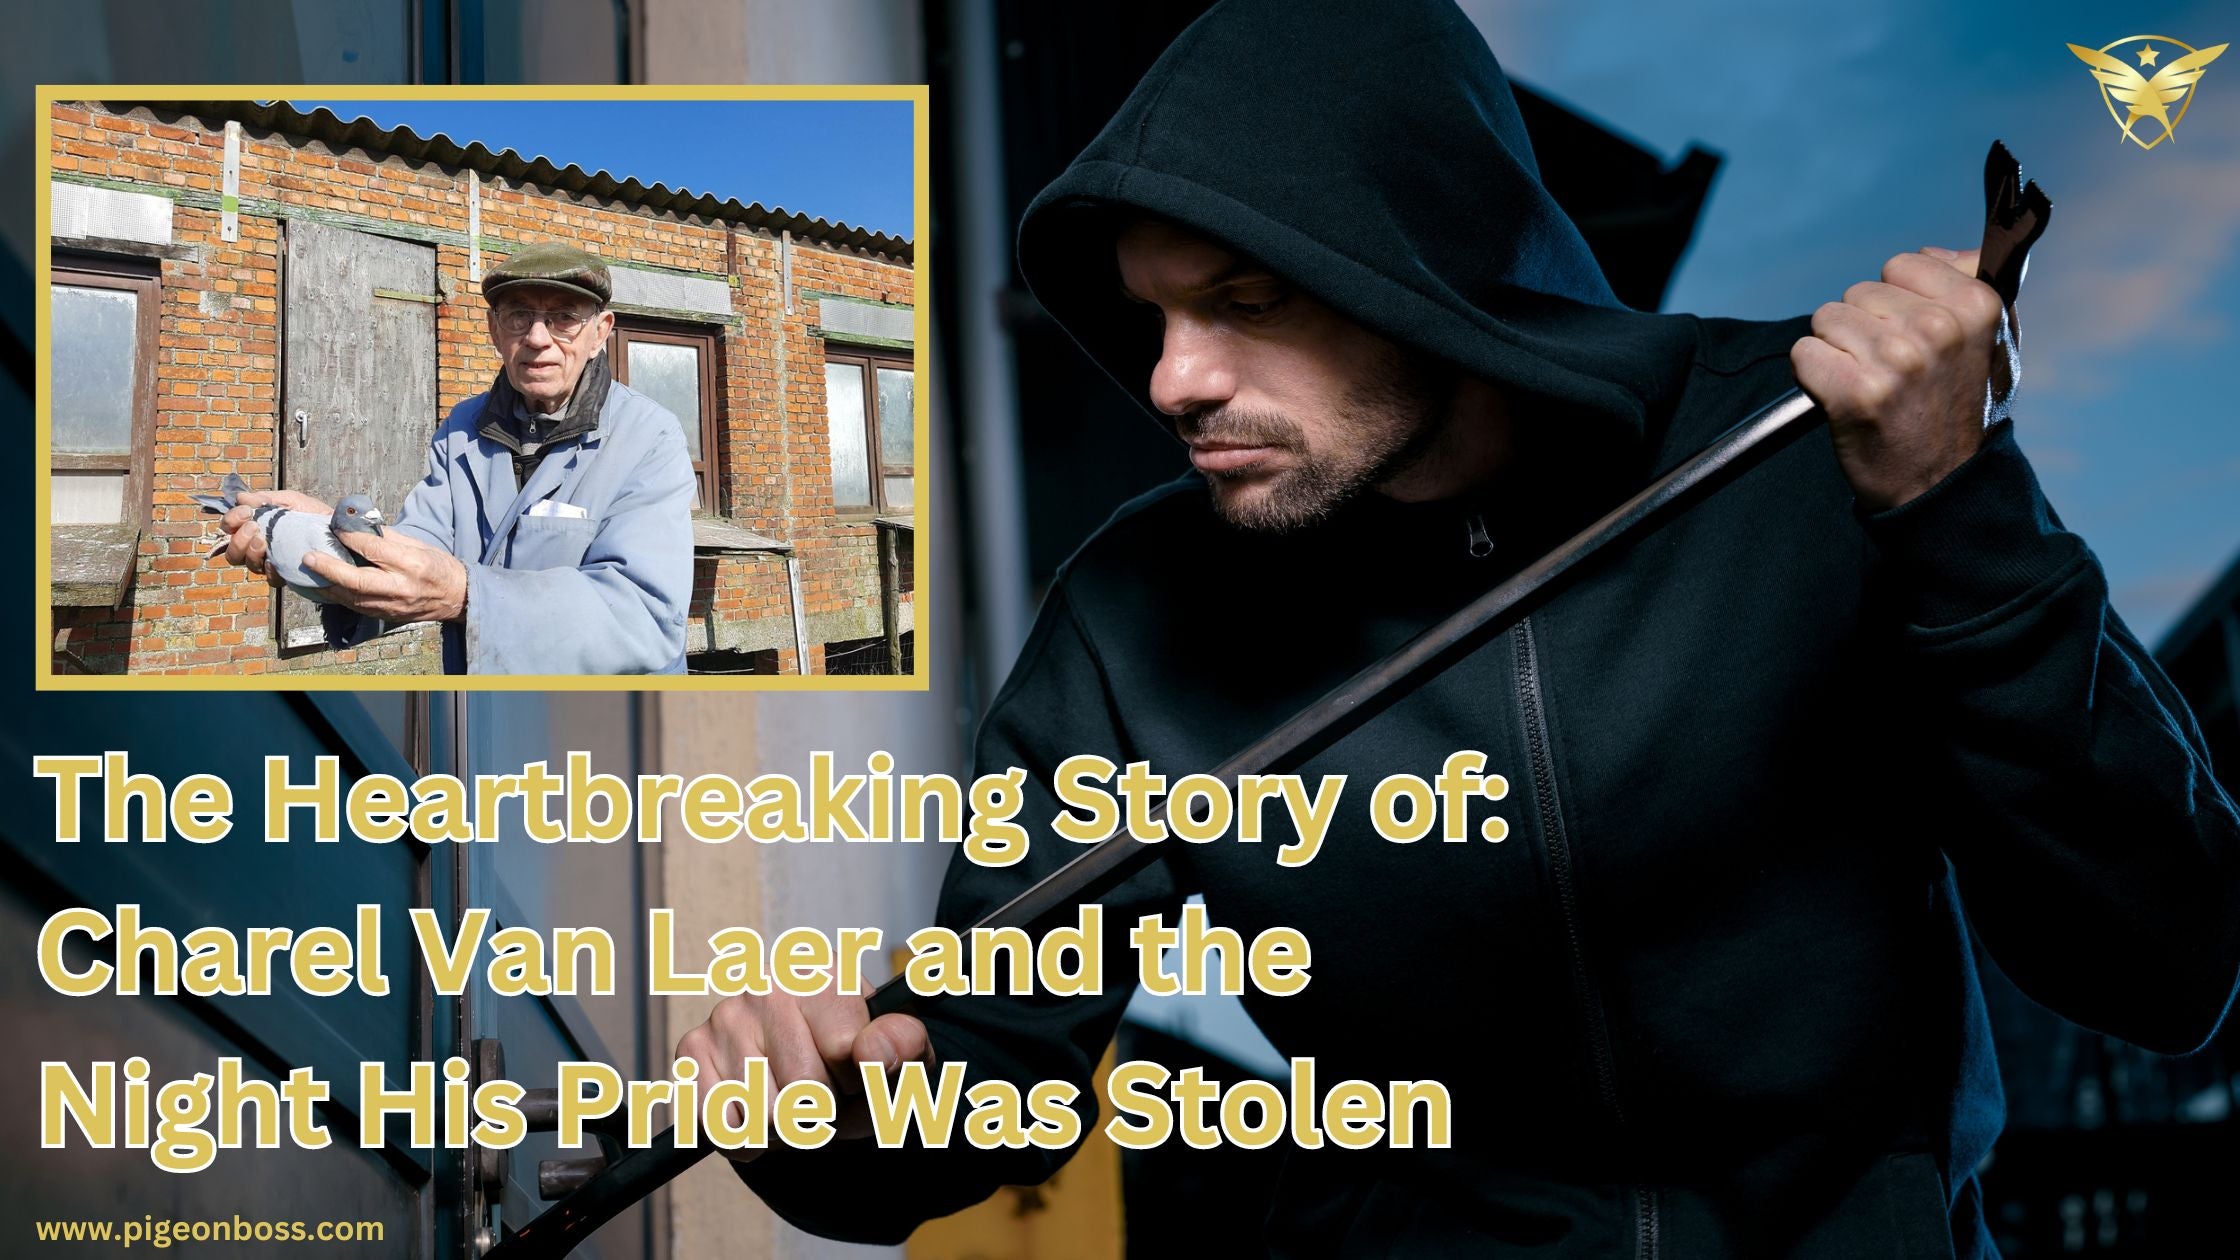 We'll Tell You: The Heartbreaking Story of Charel Van Laer and the Night His Pride Was Stolen